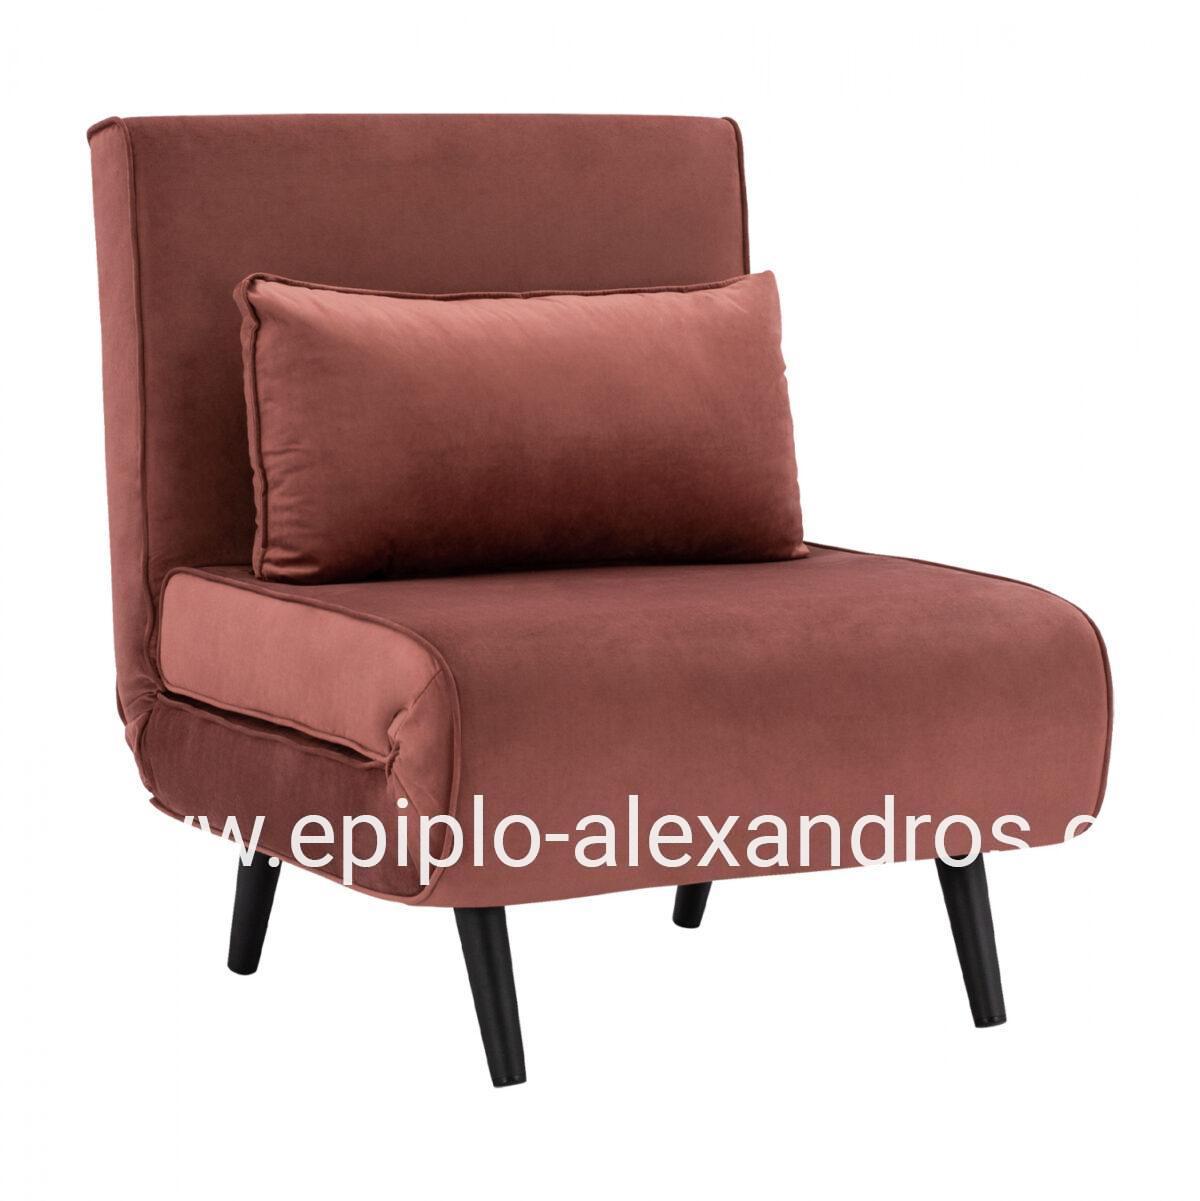 ARMCHAIR BRAXTON MADE FROM VELVET DUSTY PINK HM8425.12 75X75X88Y cm.